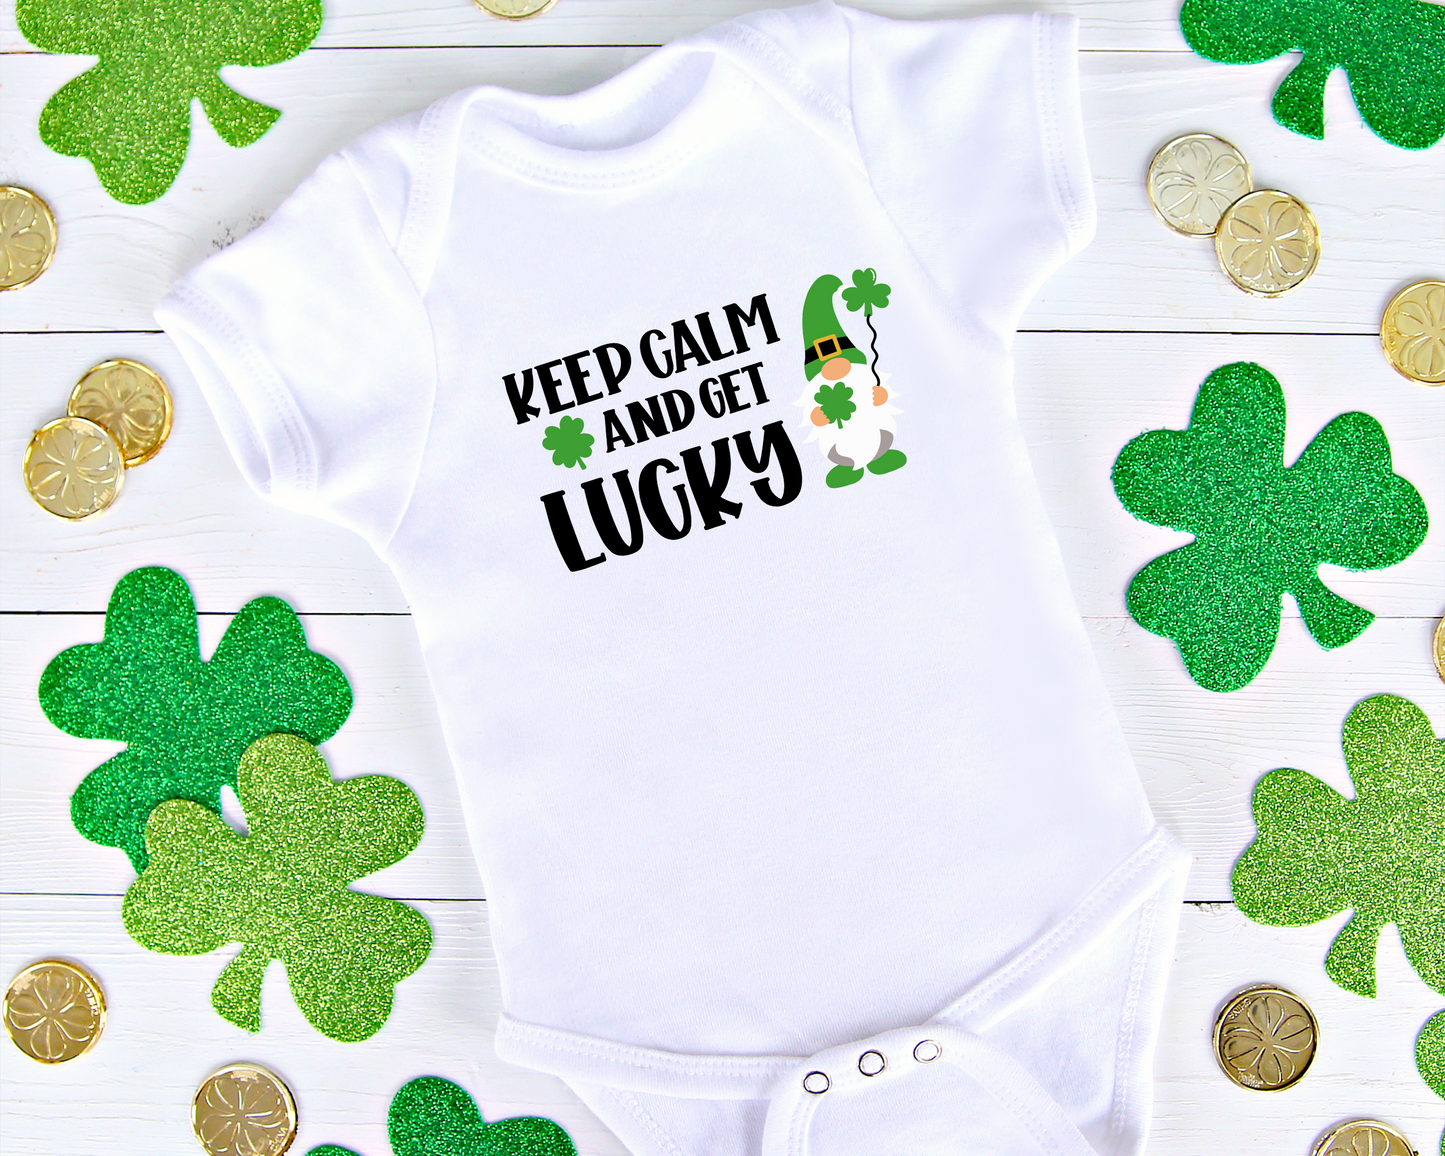 Keep Calm & Get Lucky - St. Patrick's Day Onesie® | Holiday Bodysuit